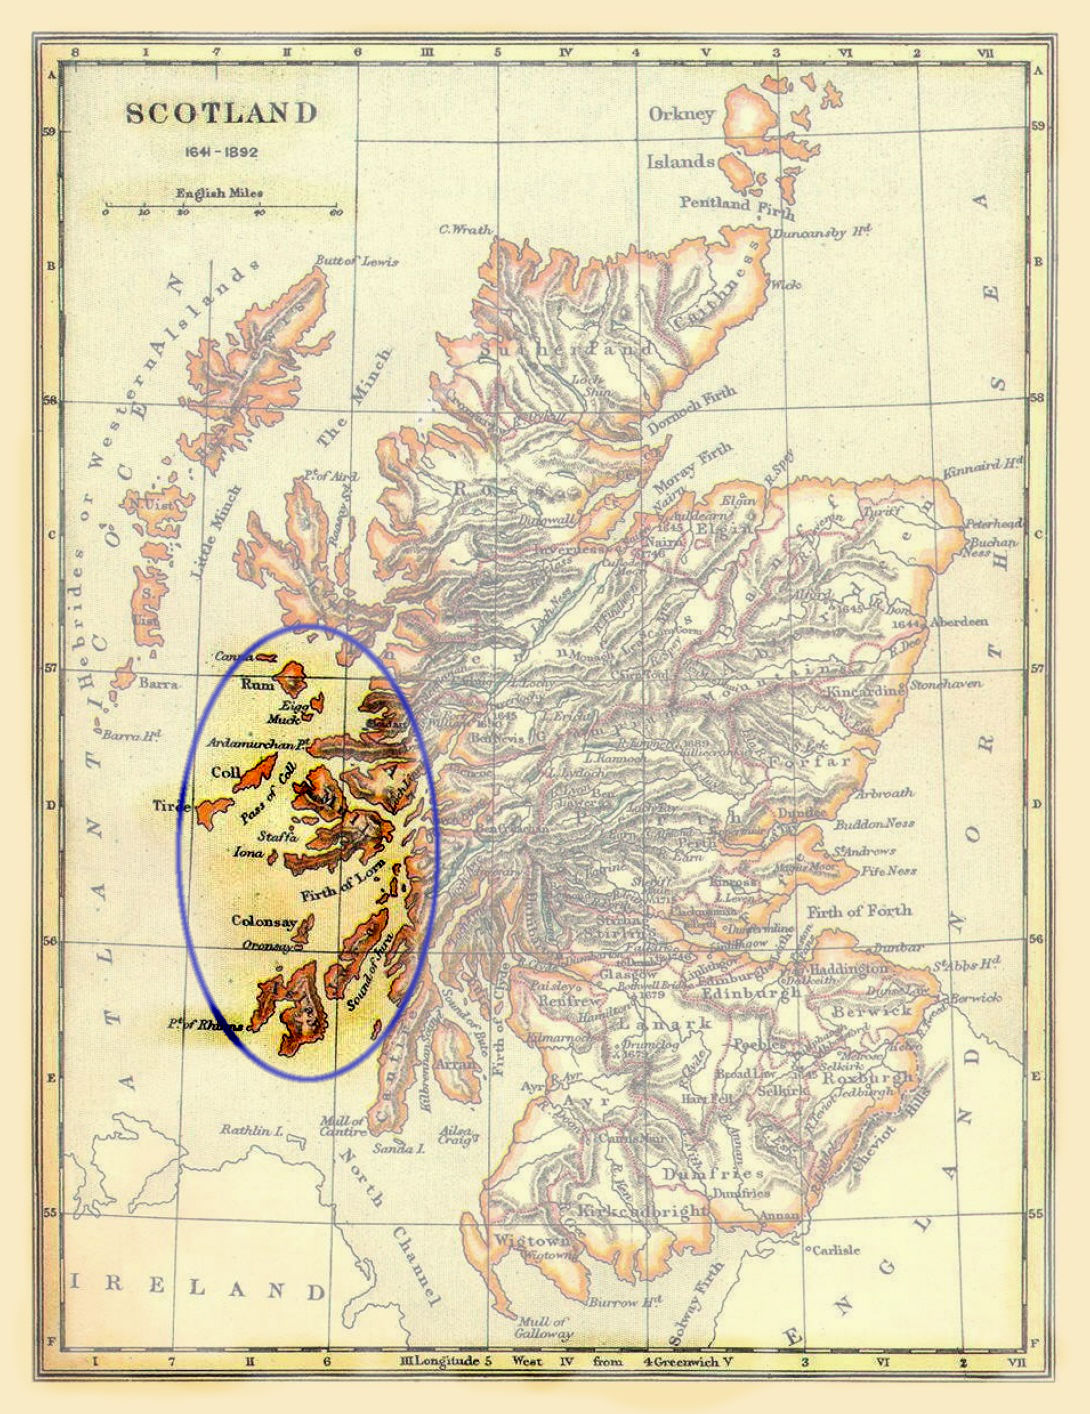 Map of Scotland and tour area